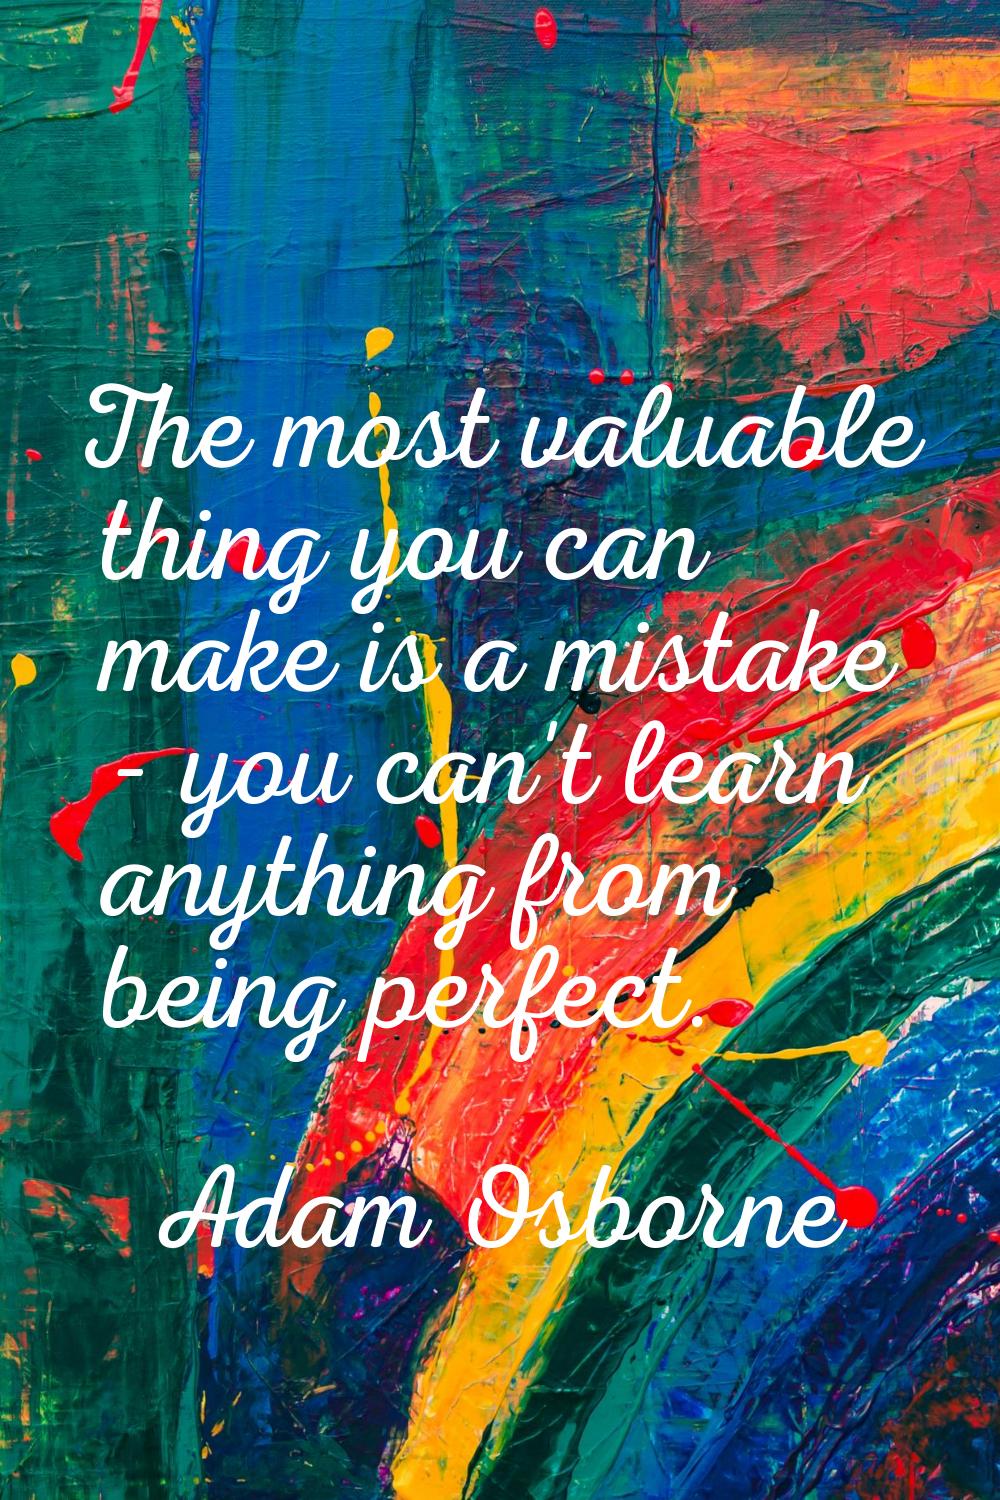 The most valuable thing you can make is a mistake - you can't learn anything from being perfect.